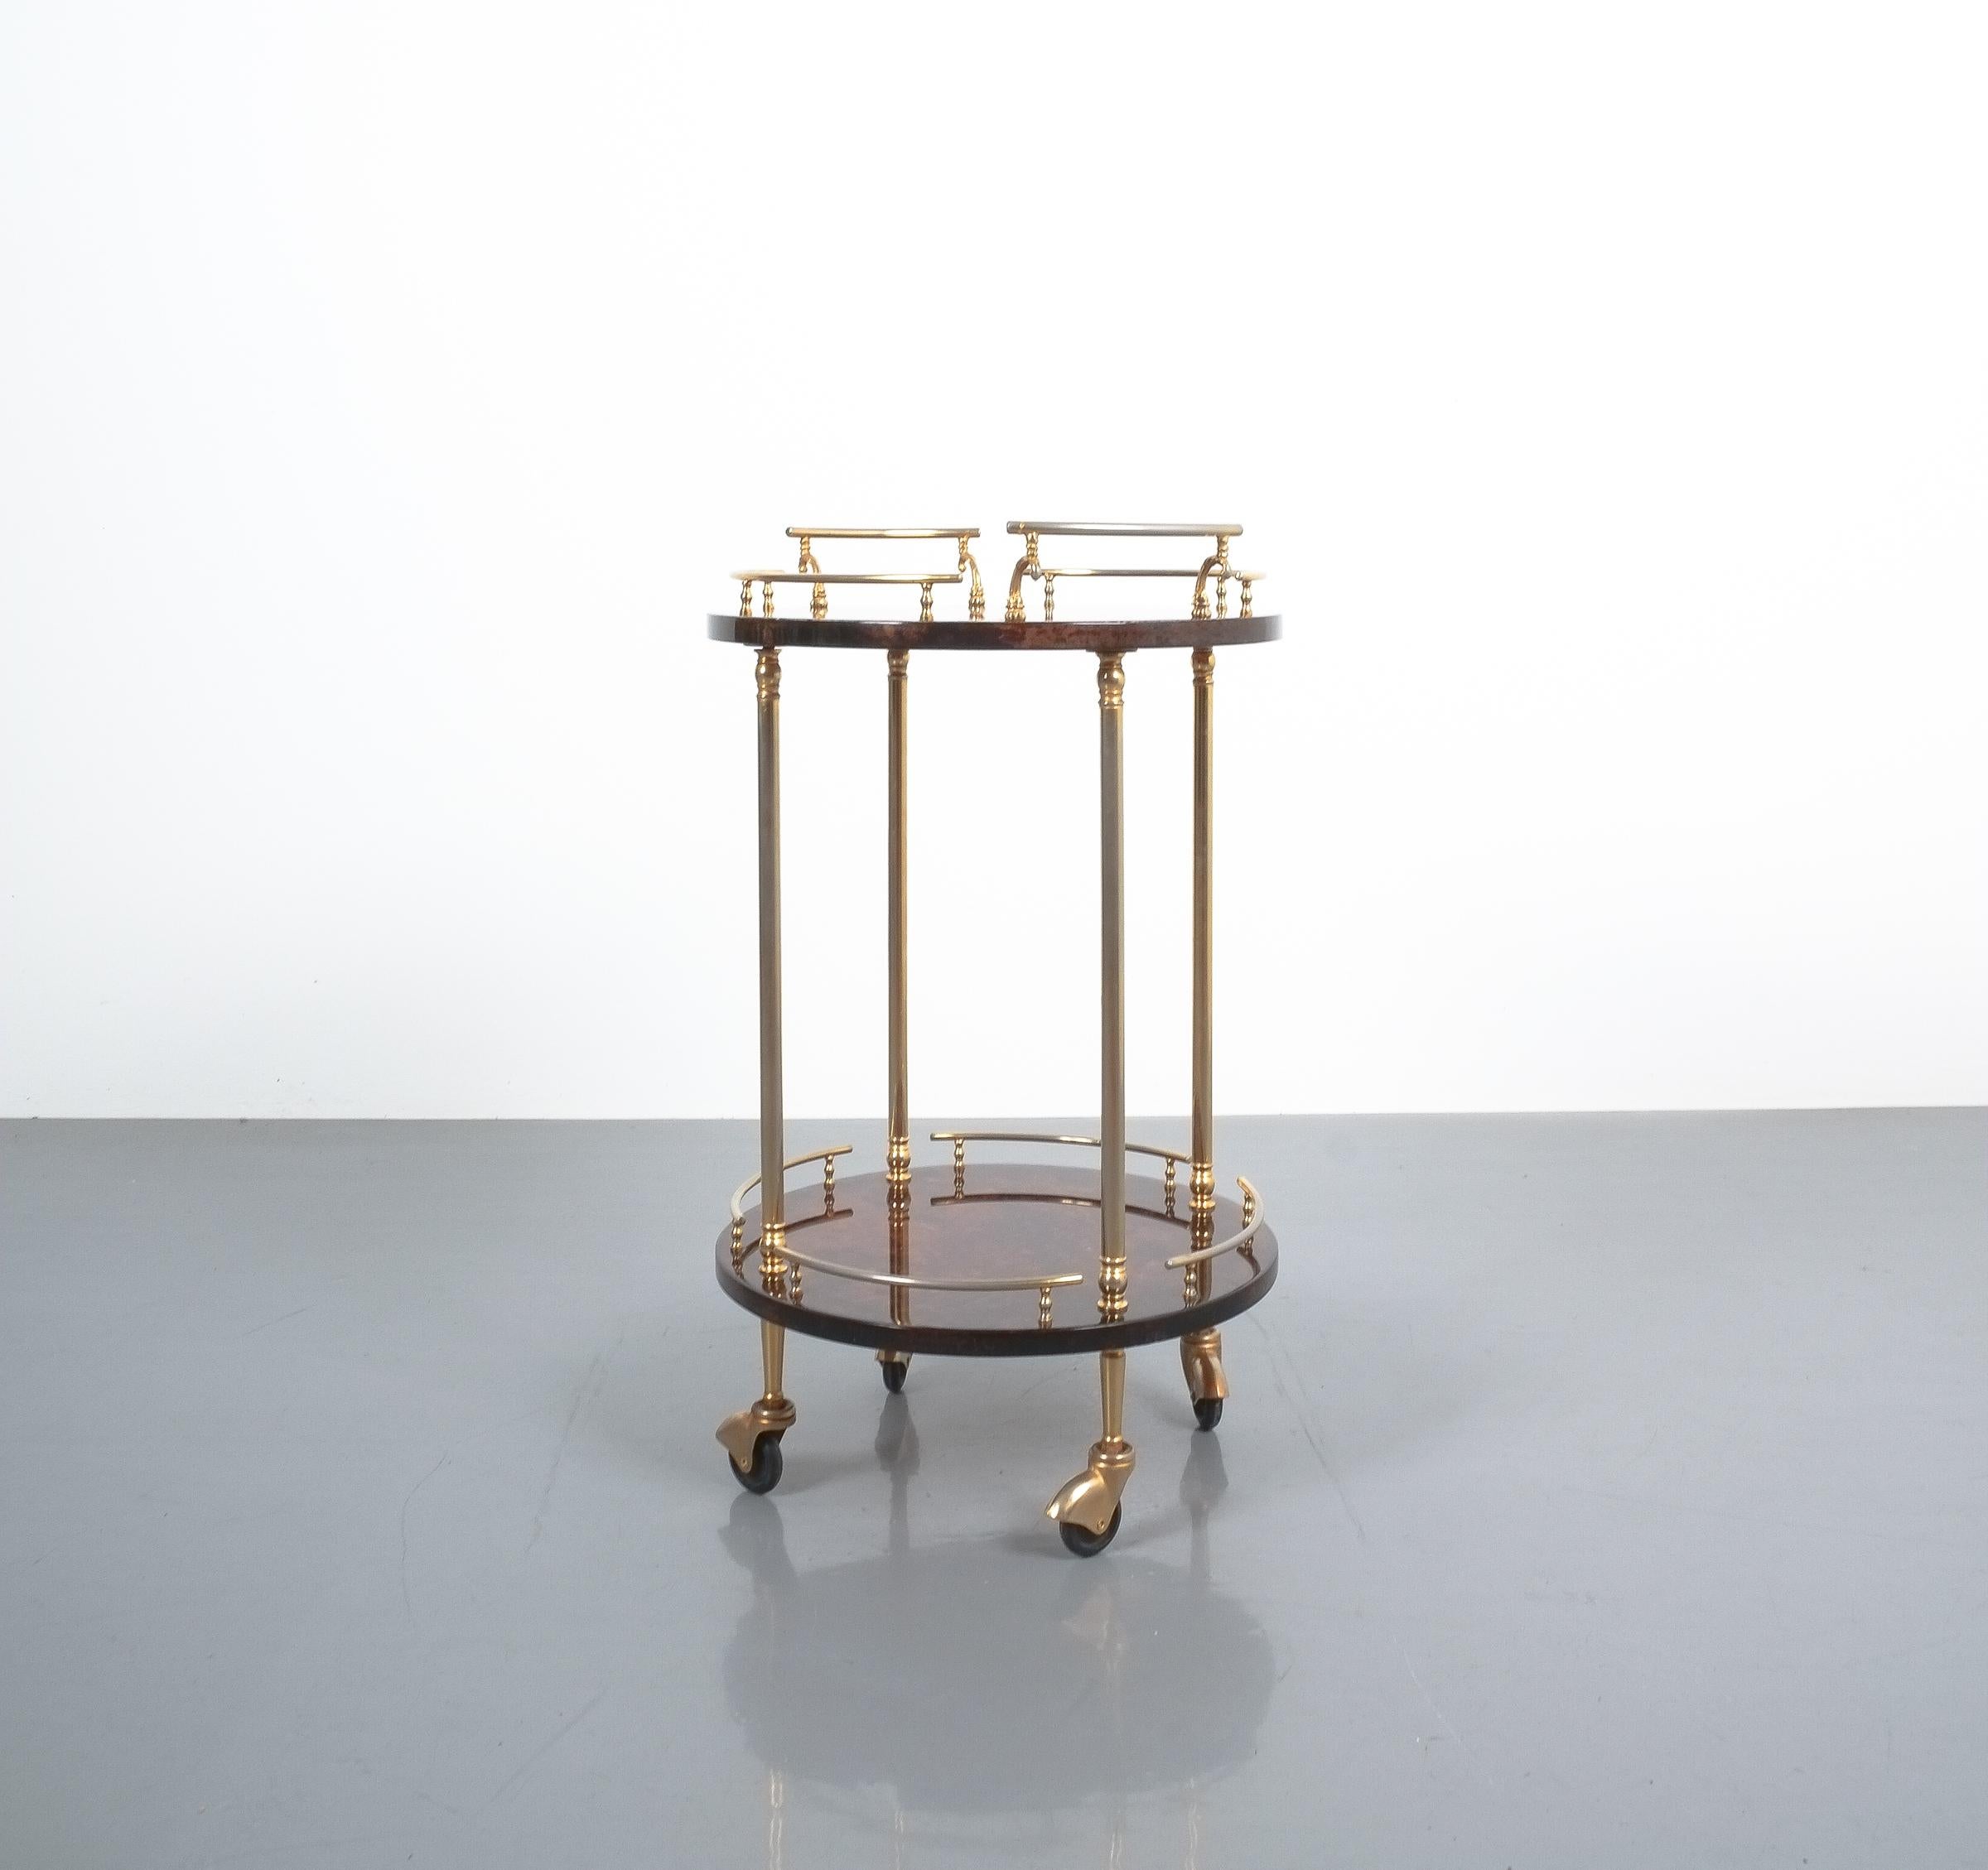 Petite liquor or bar cart by Aldo Tura Milan, Italy. It's composed of two dyed and lacquered parchment trays and brass hardware and it's in very good condition. Minimal, very superficial traces of use are visible.